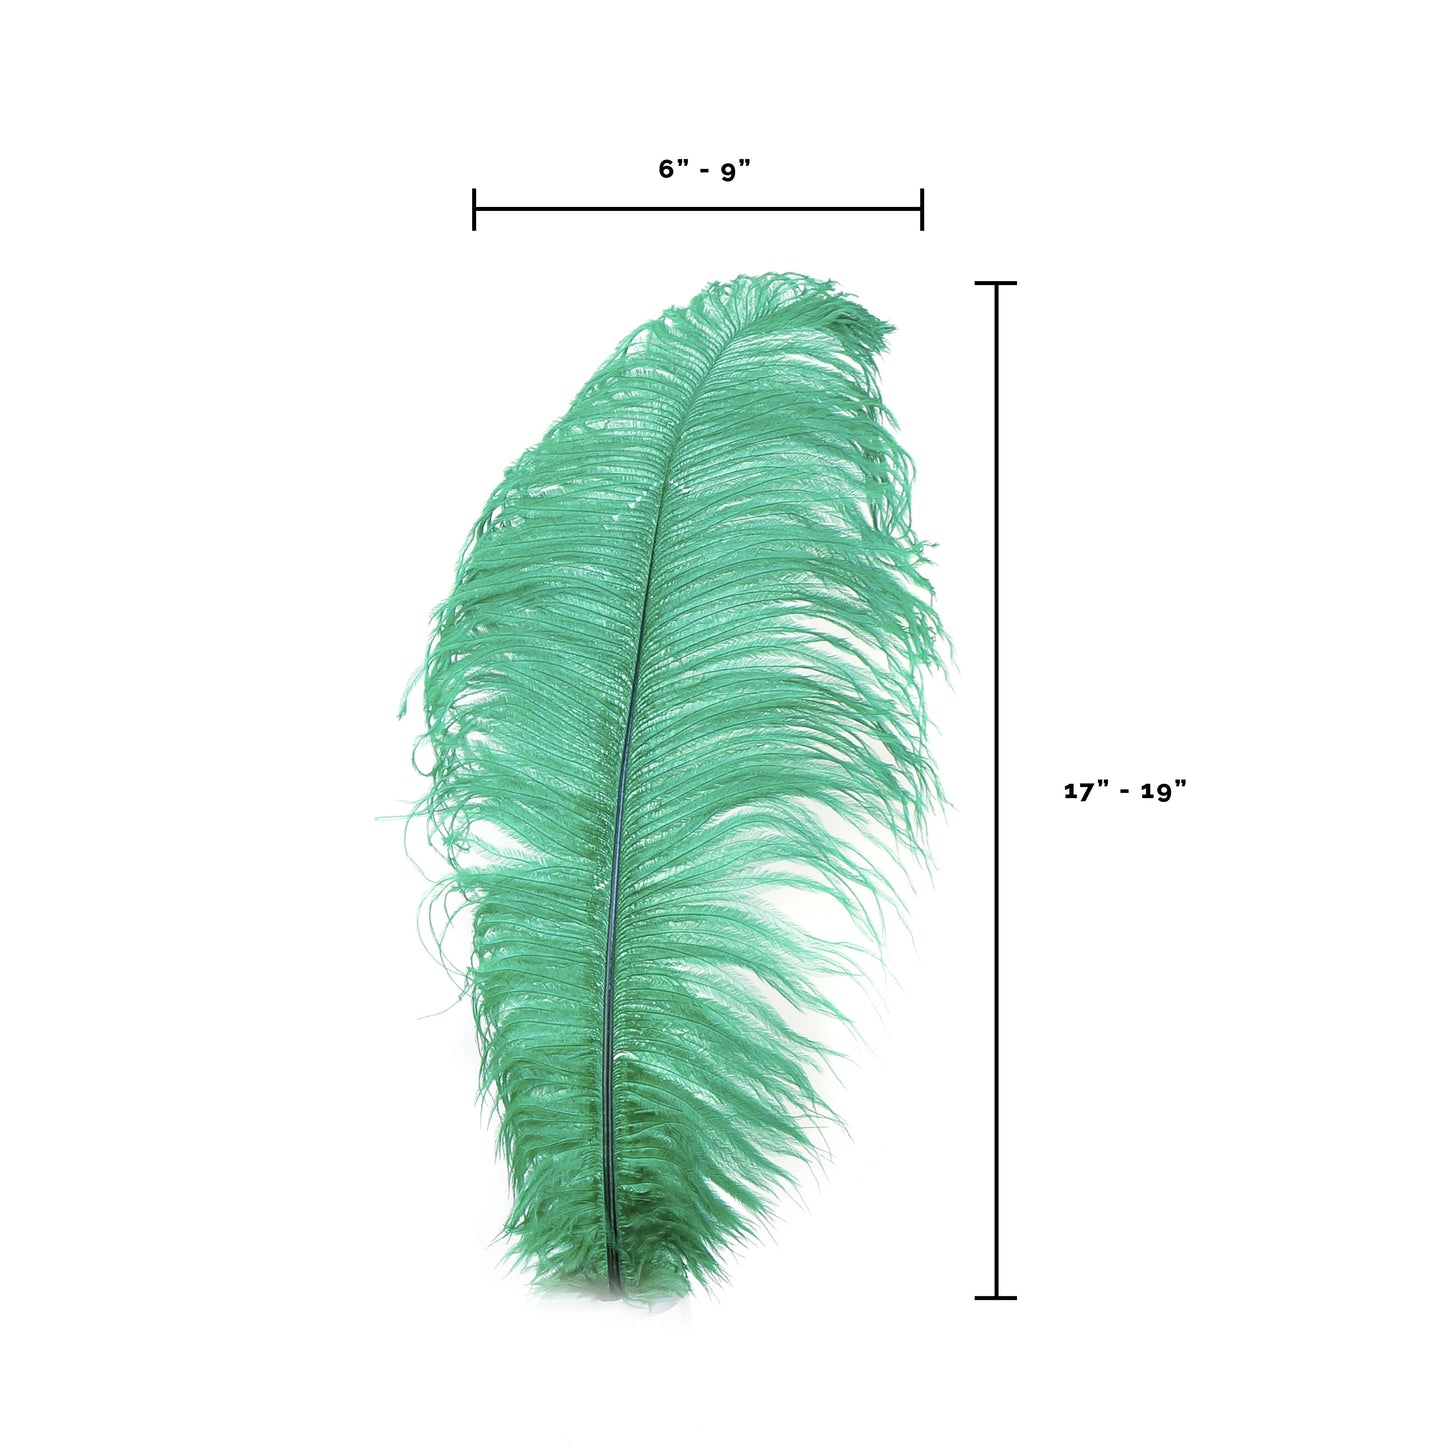 Ostrich Feather Drabs - 17-19" 12pcs - Emerald